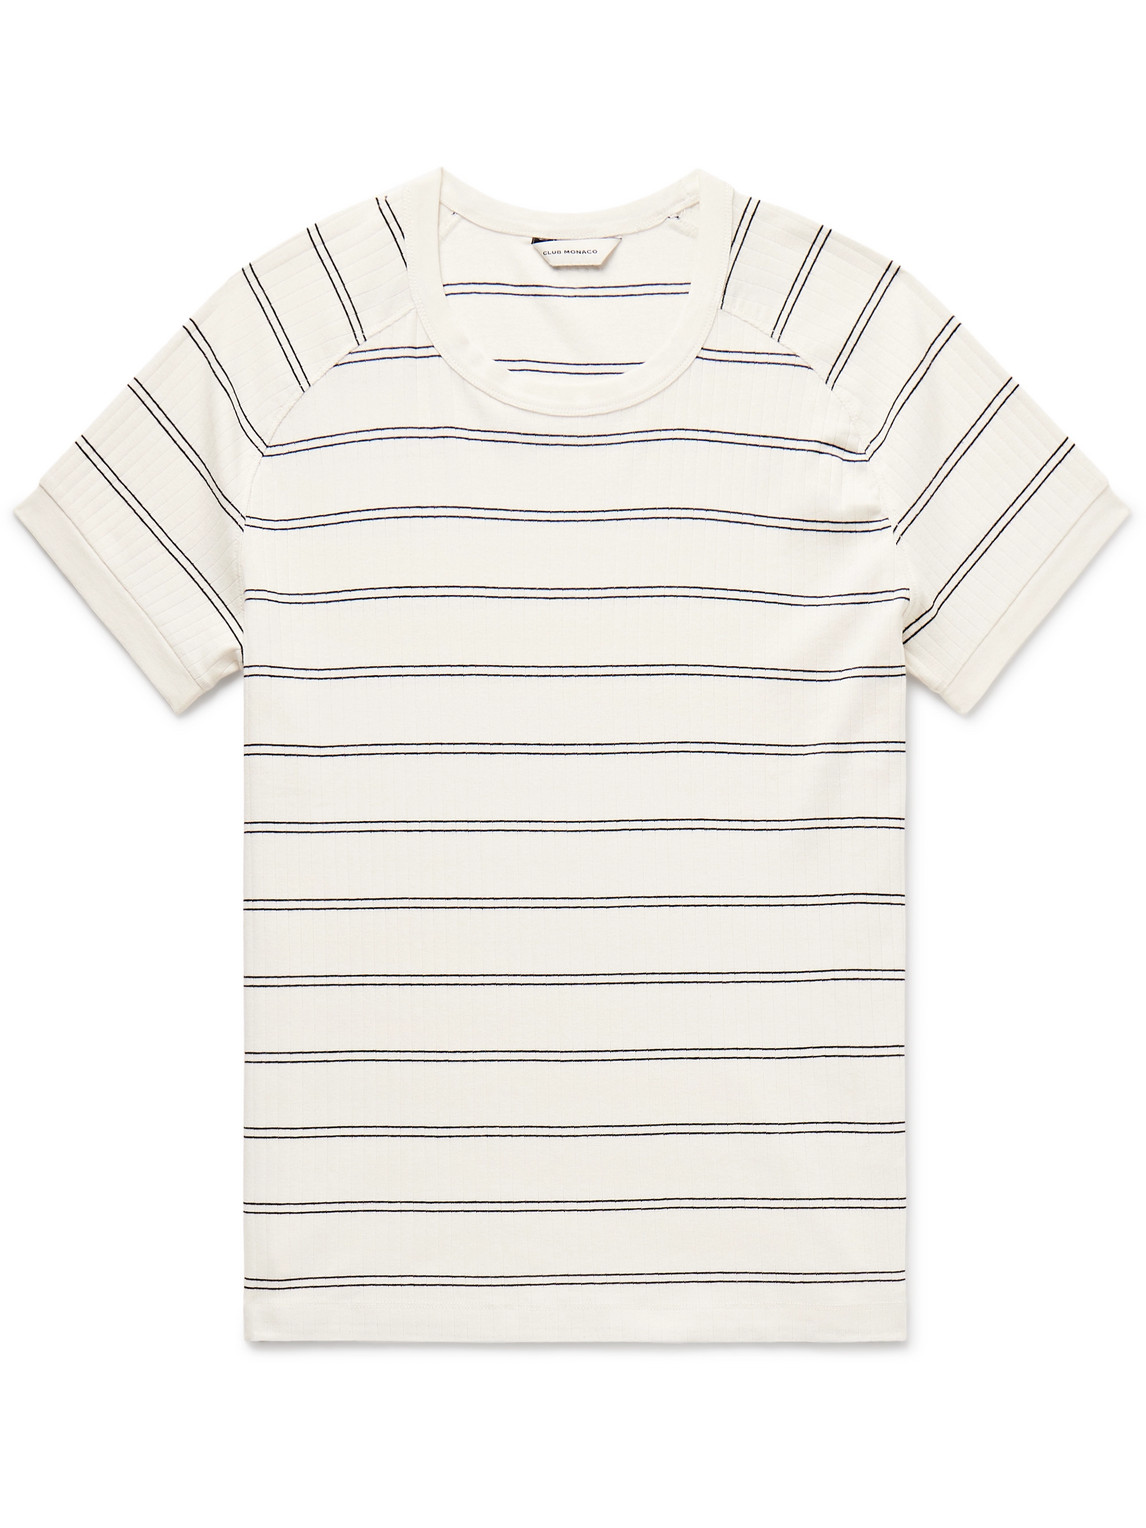 Refined Striped Ribbed Cotton-Blend T-Shirt